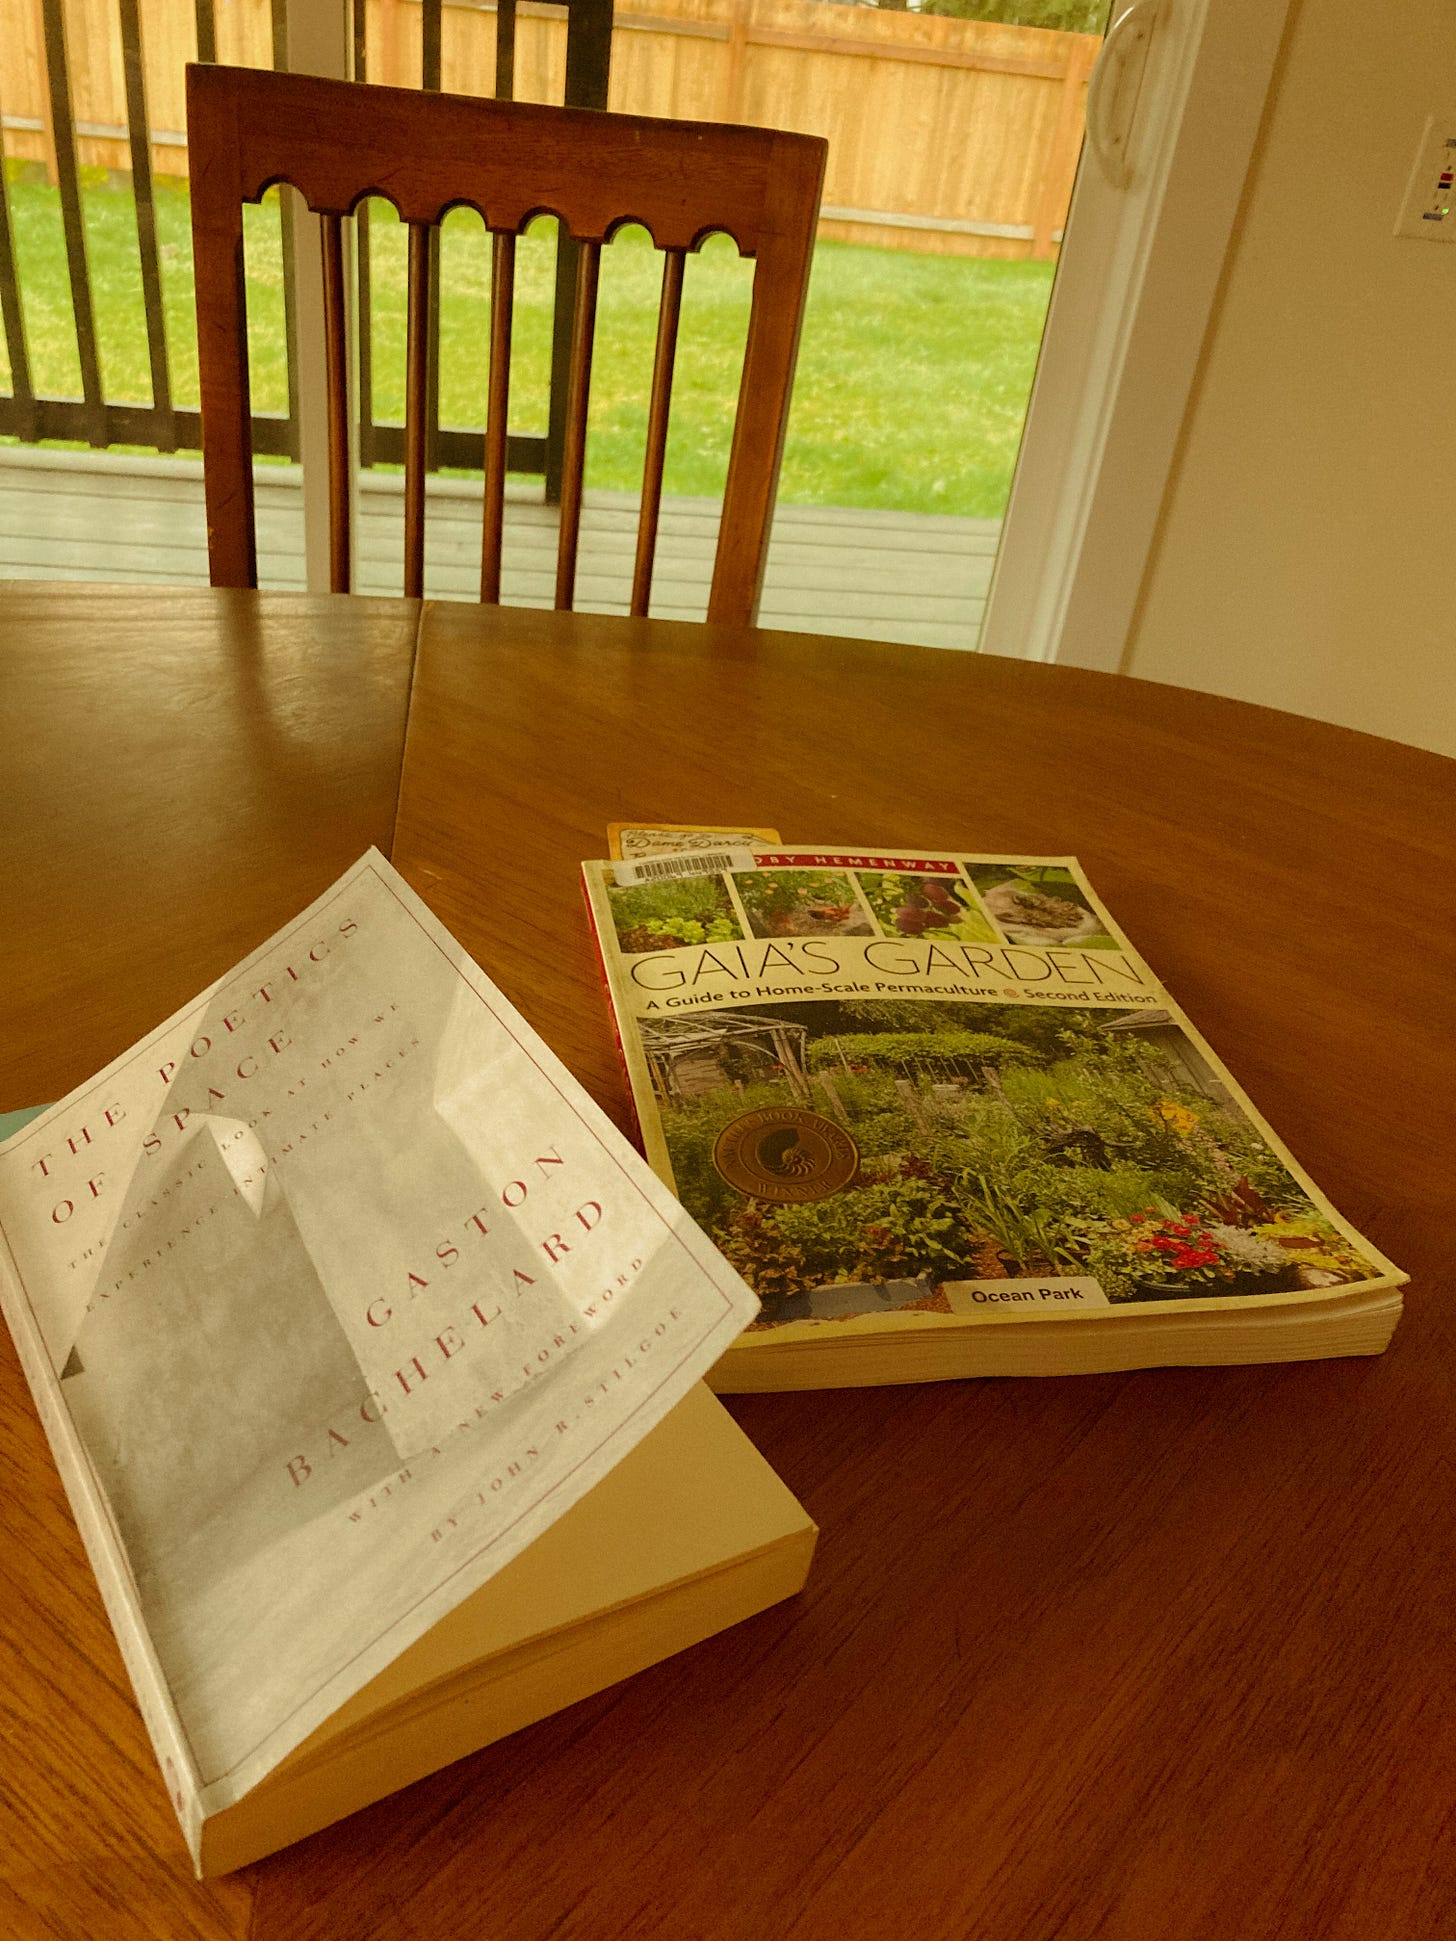 The books The Poetics of Space and Gaia's Garden lay on top of a kitchen table, in front of a sliding door which looks out at a grassy lawn.